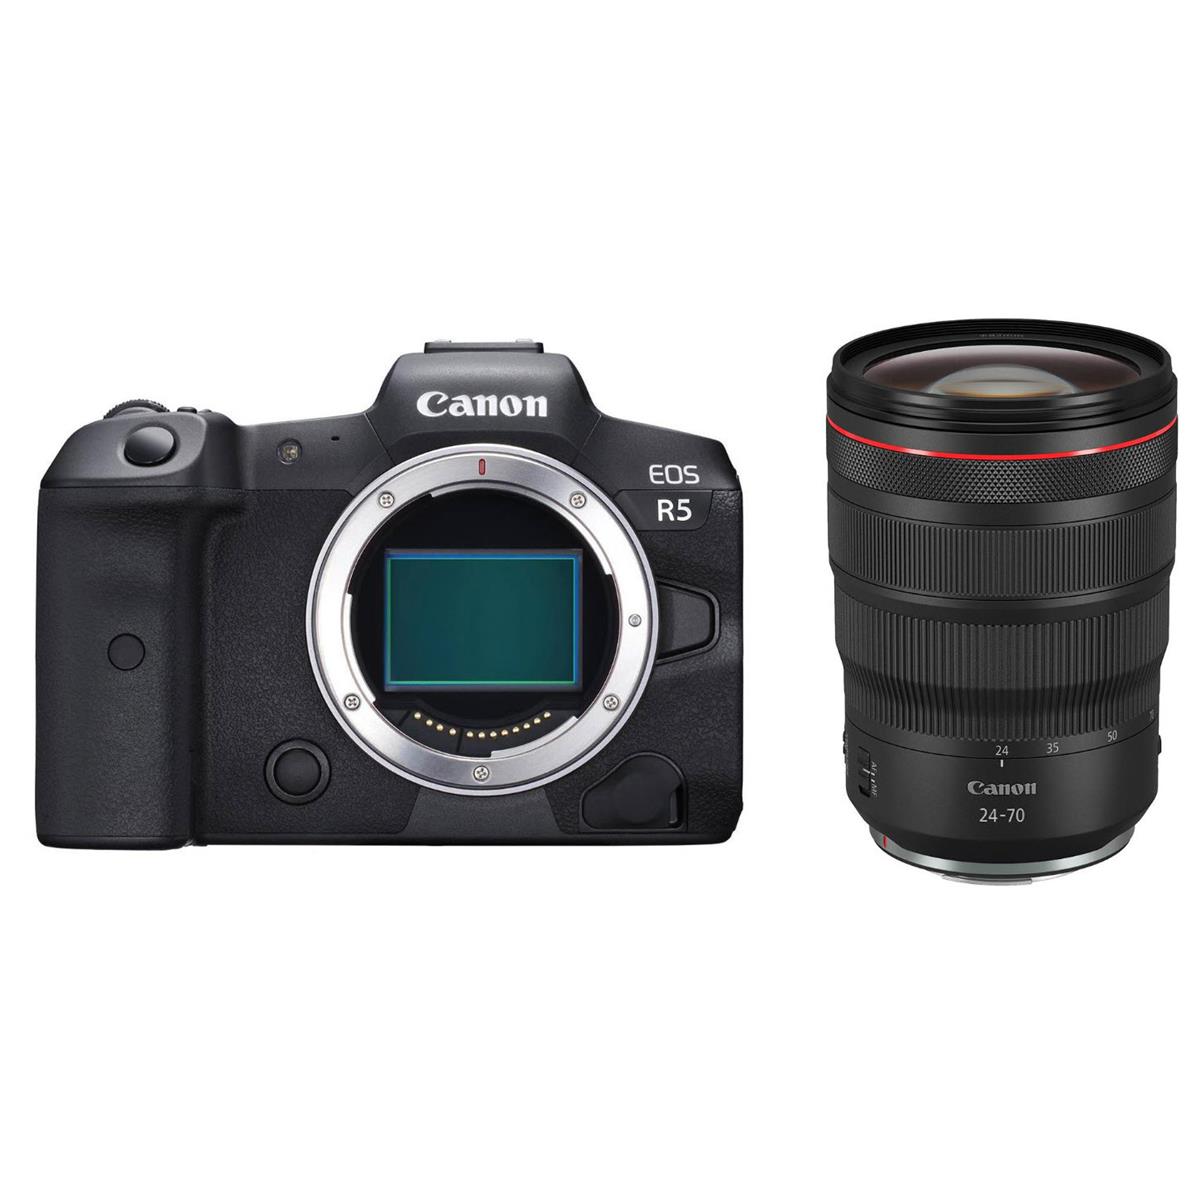 Canon EOS R5 Mirrorless Digital Camera with Canon RF 24-70mm f/2.8 L IS USM Lens